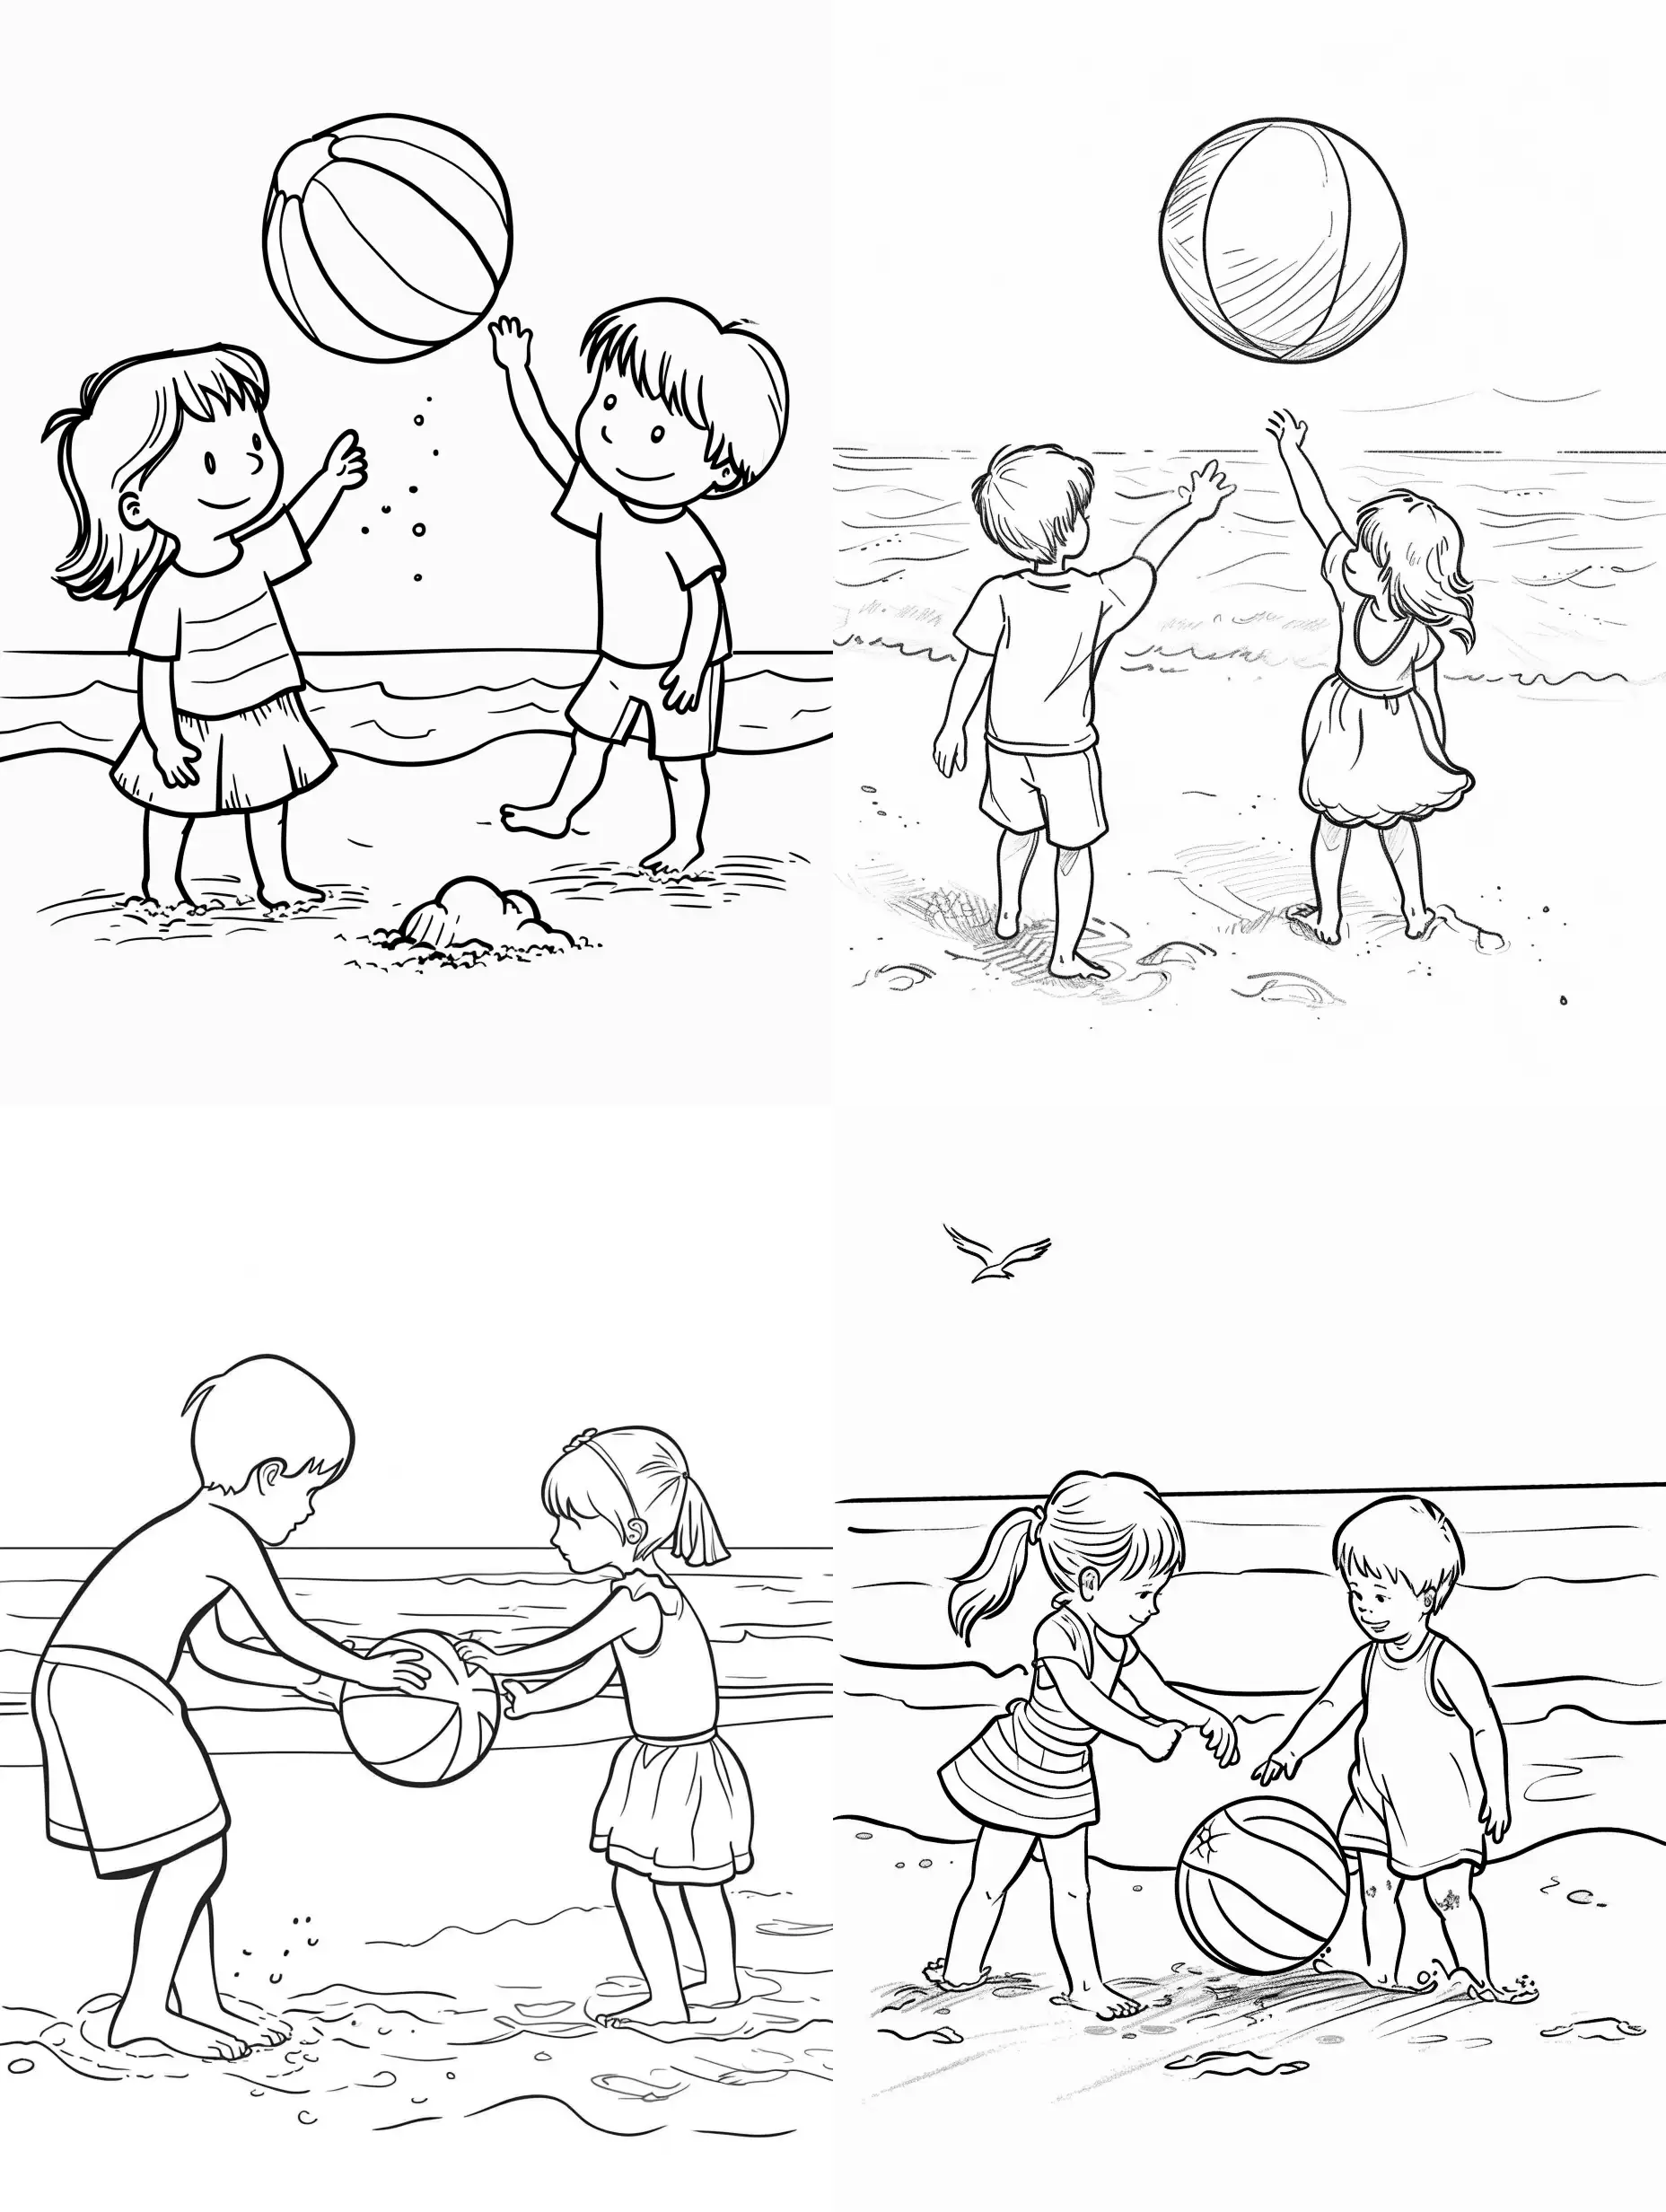 Make very simple outline drawing of Boy and girl playing beach ball on the beach